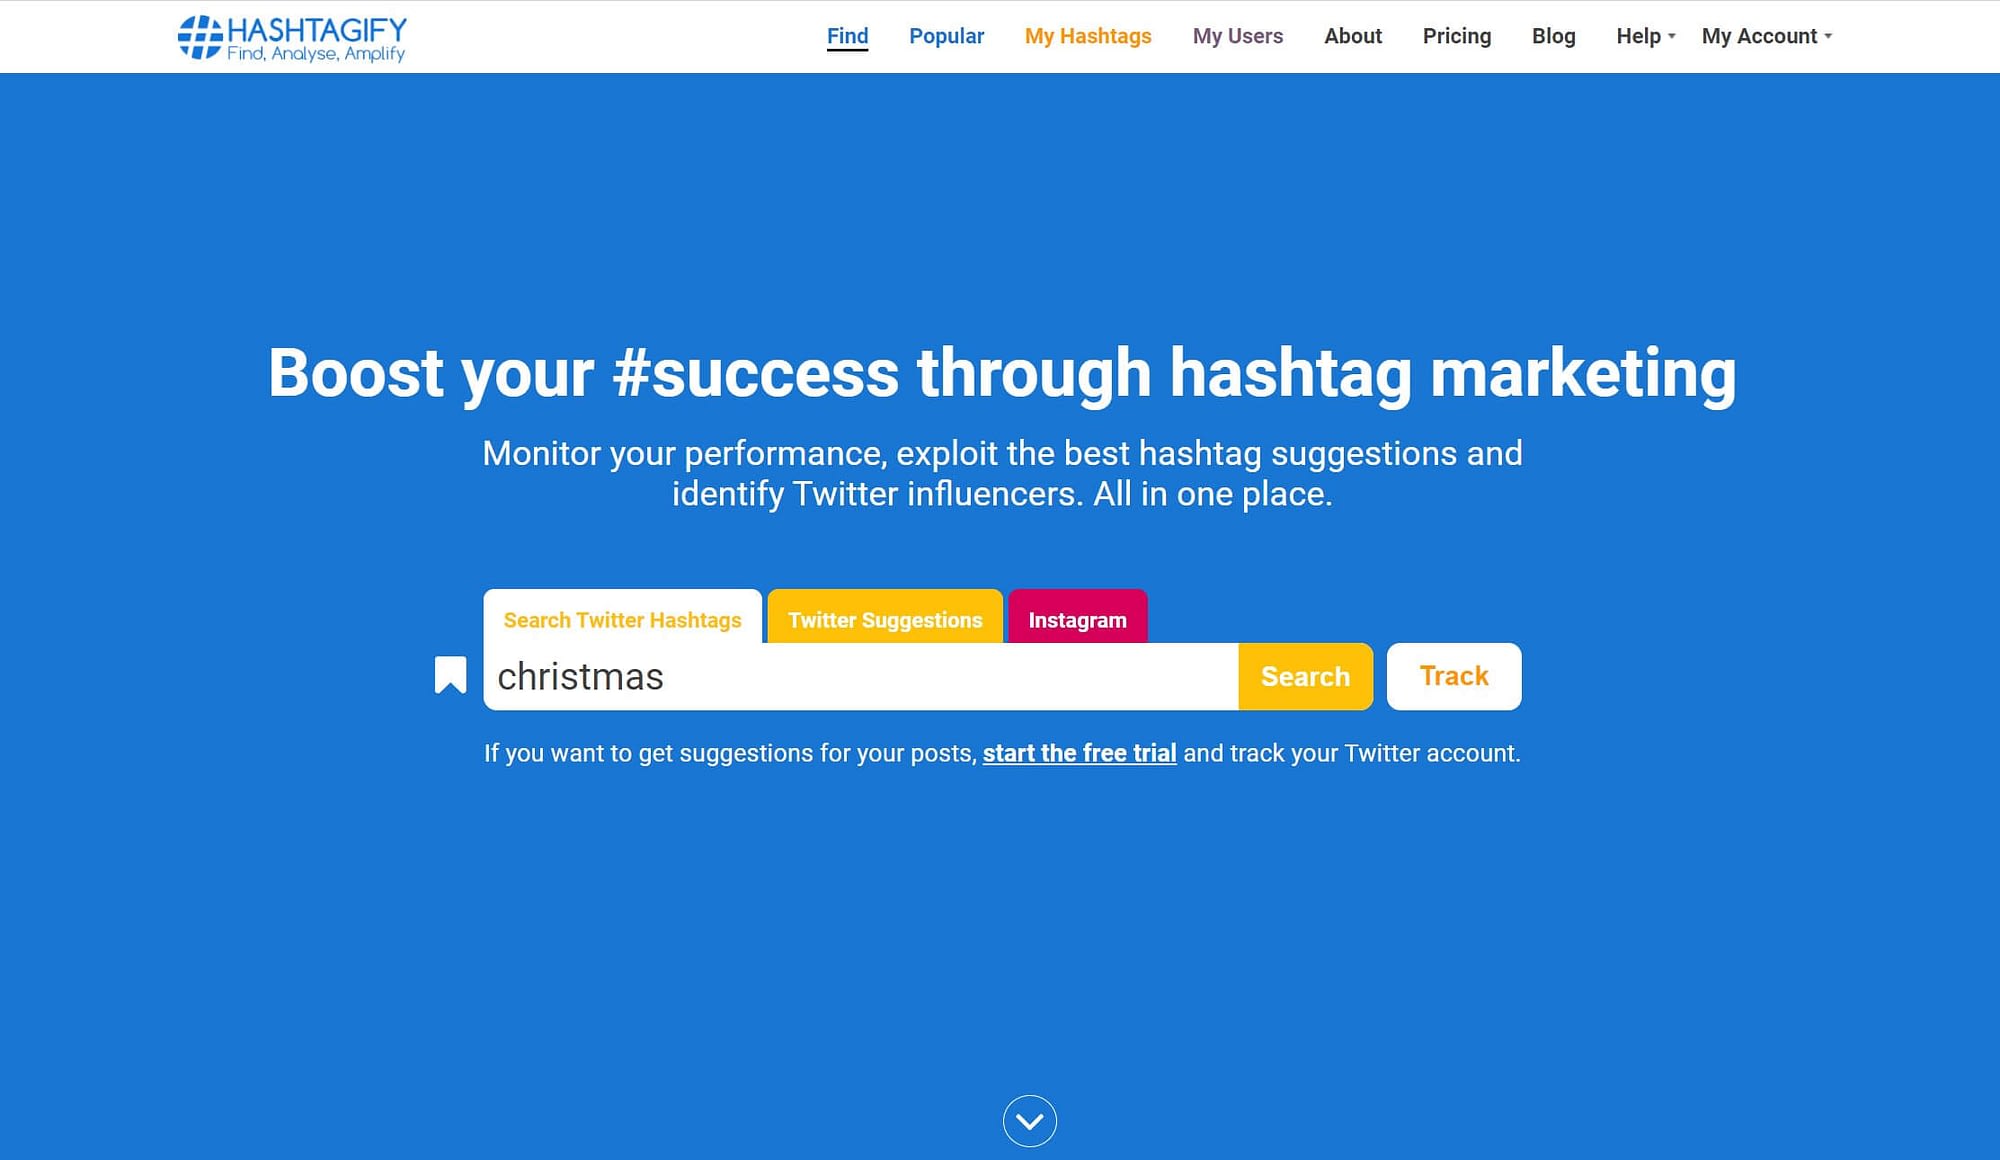 The Hashtagify home page.